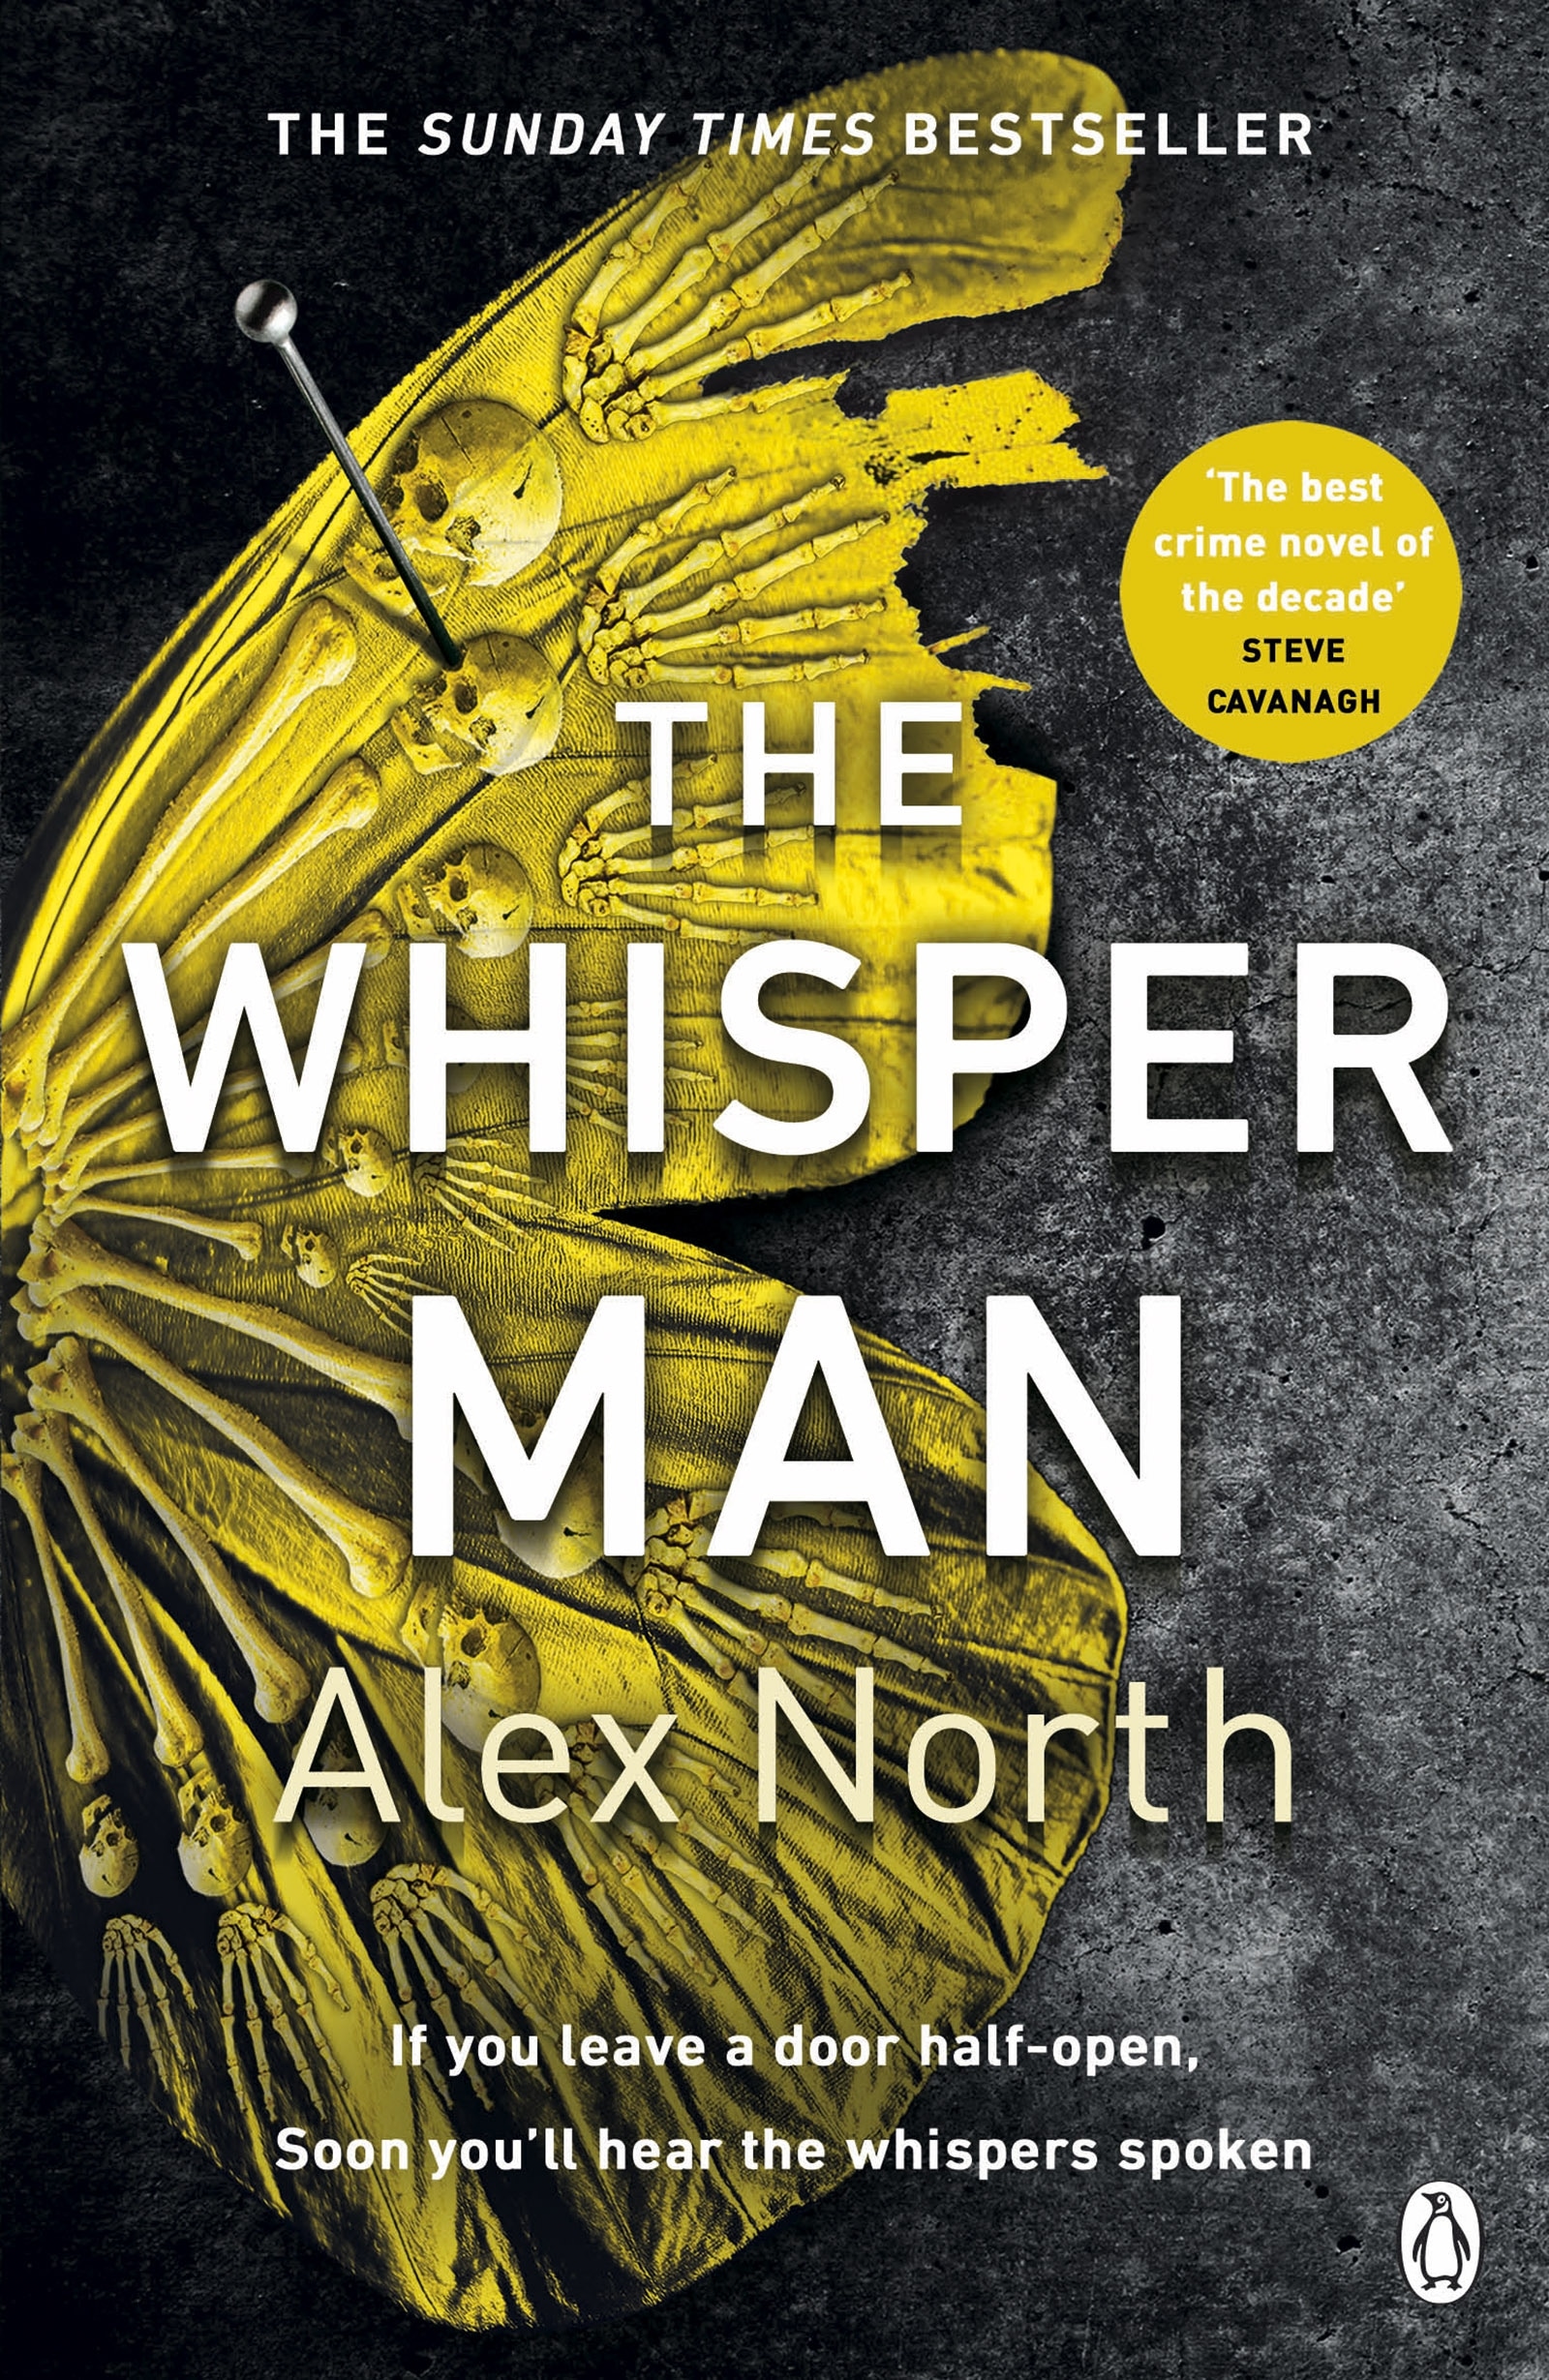 Book “The Whisper Man” by Alex North — December 12, 2019